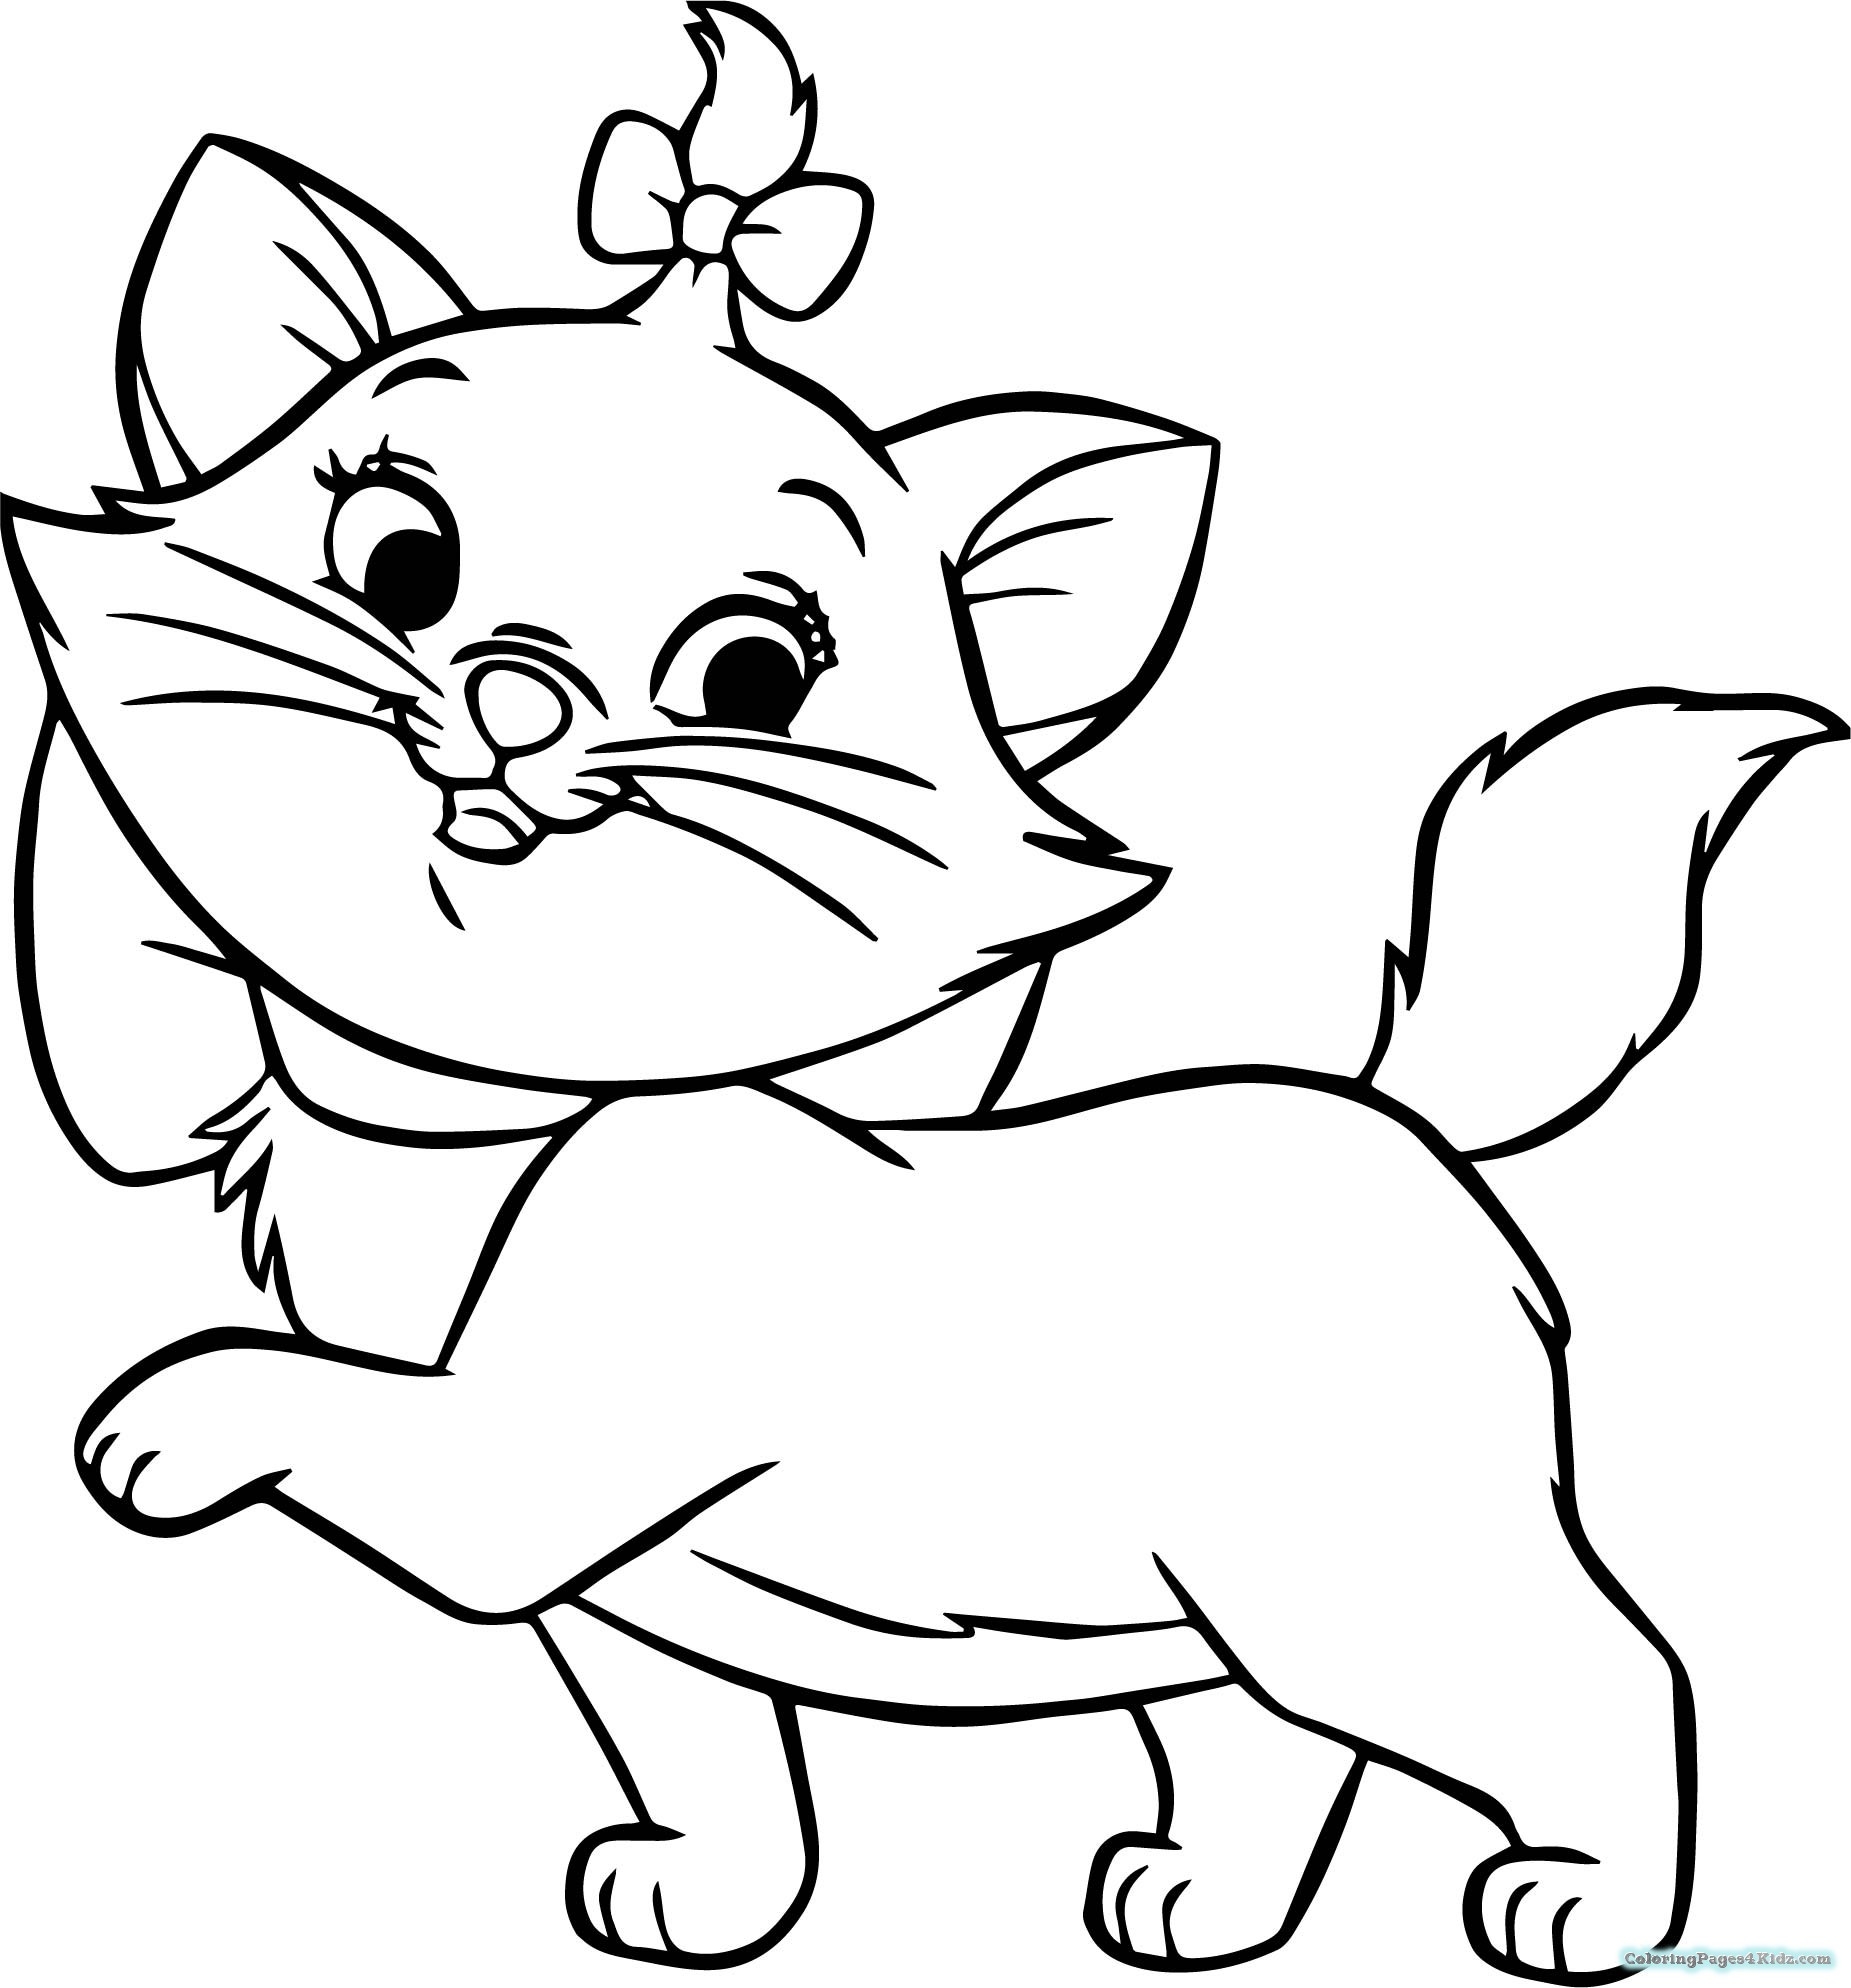 Kitten Coloring Pages Free Printable